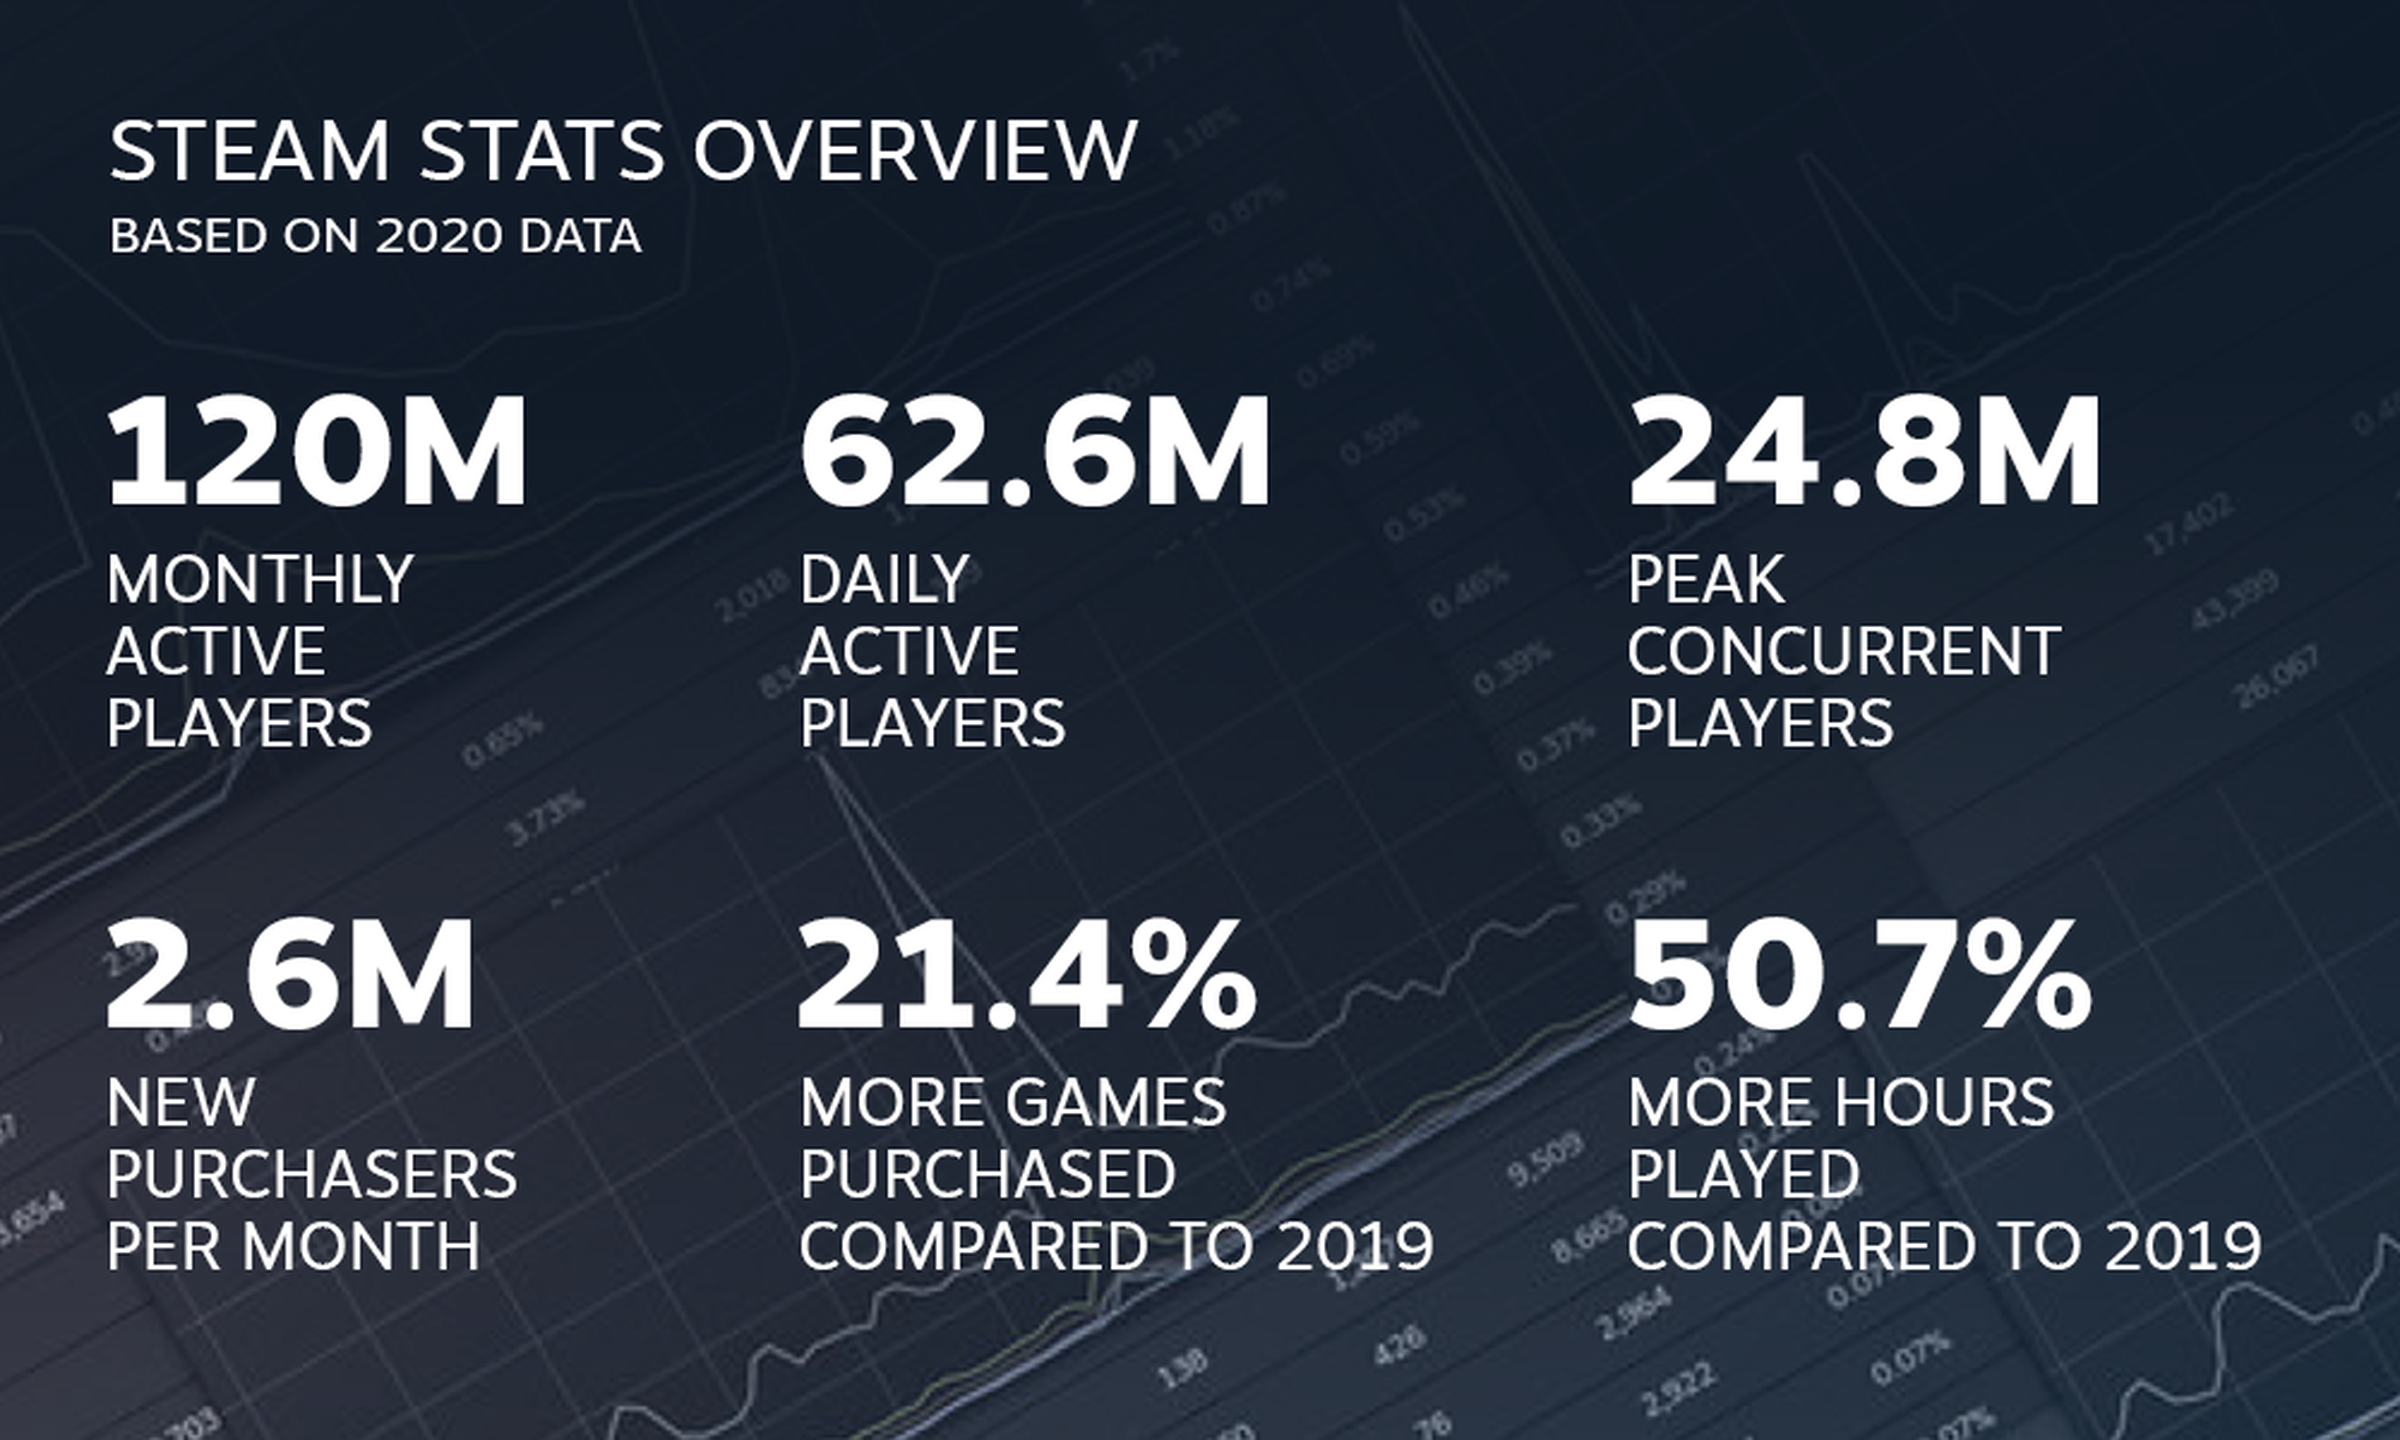 The statistics bear out what we all felt: 2020 was a year for gaming.